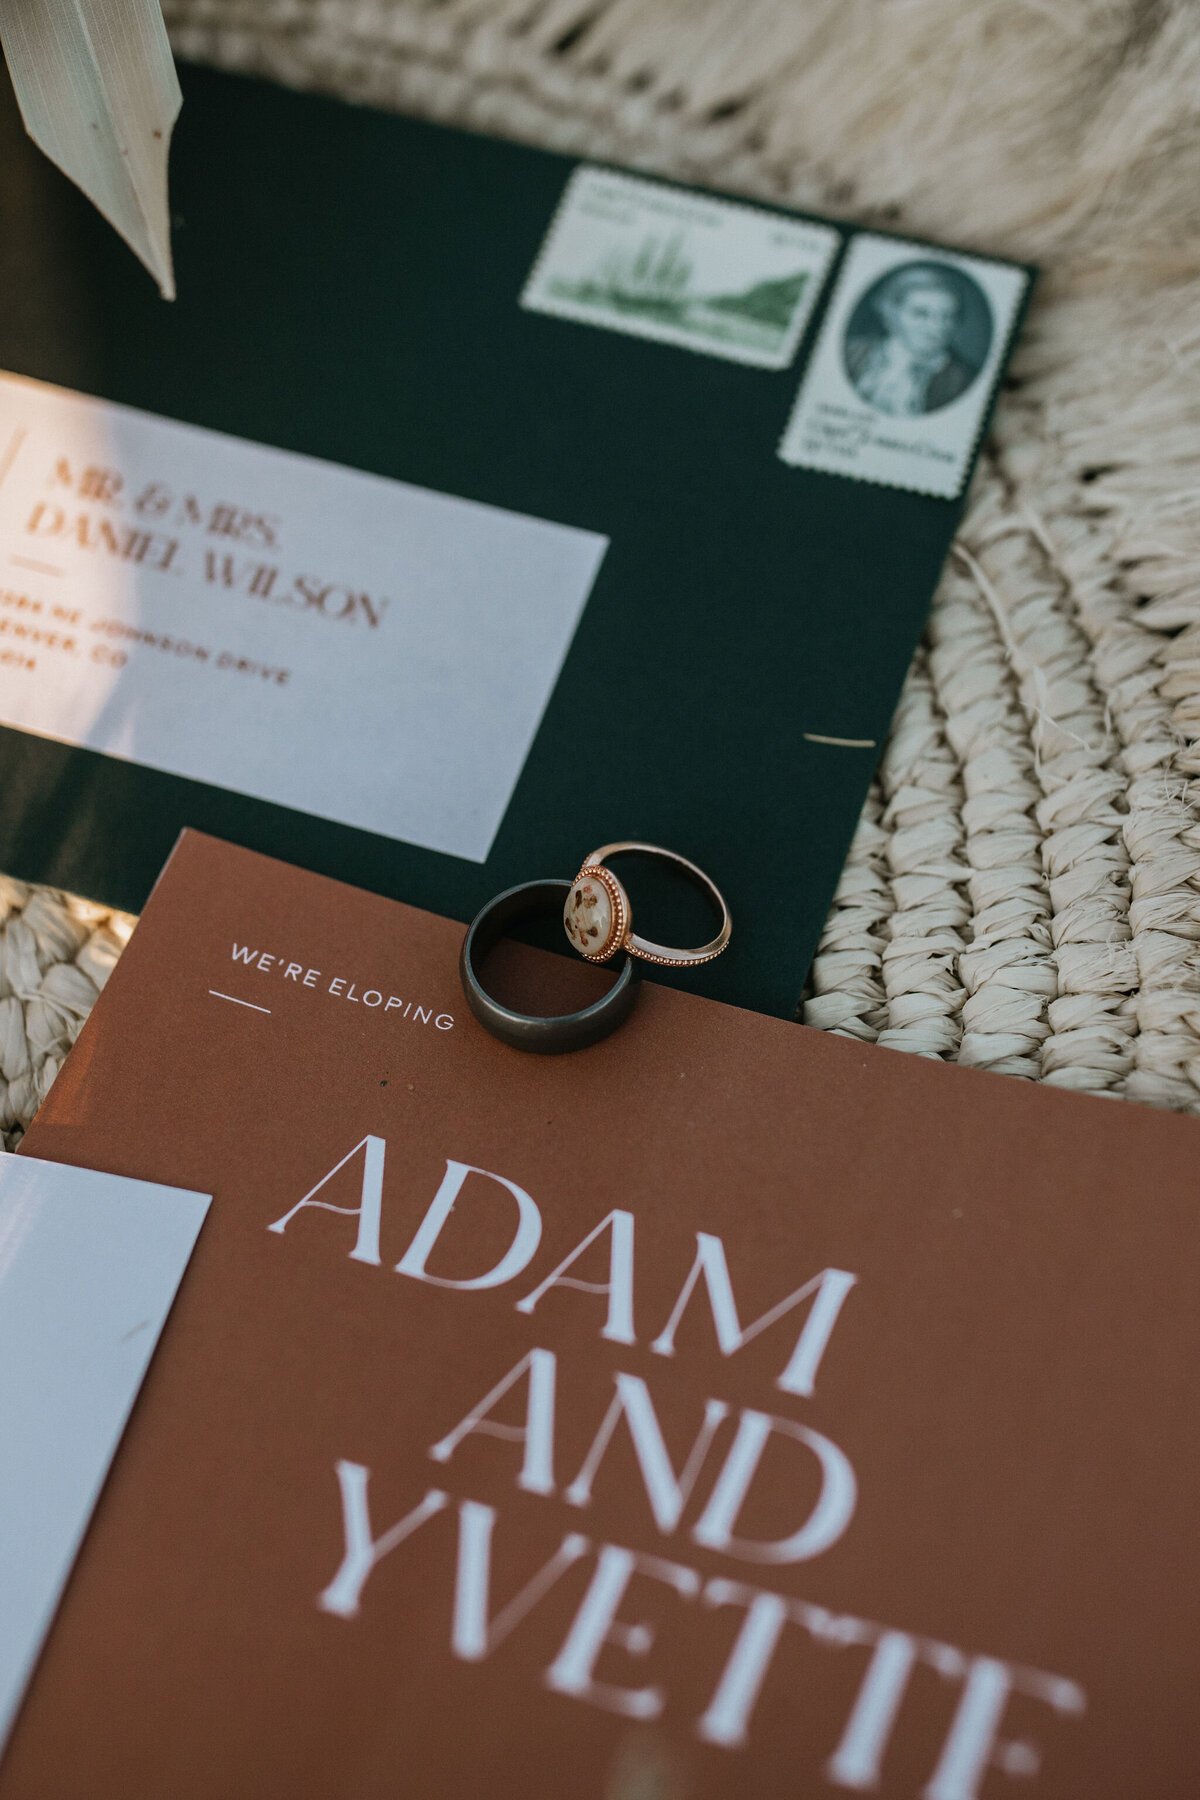 Black and rose gold wedding bands set atop mixed wedding stationery with white lettering on a table charger.